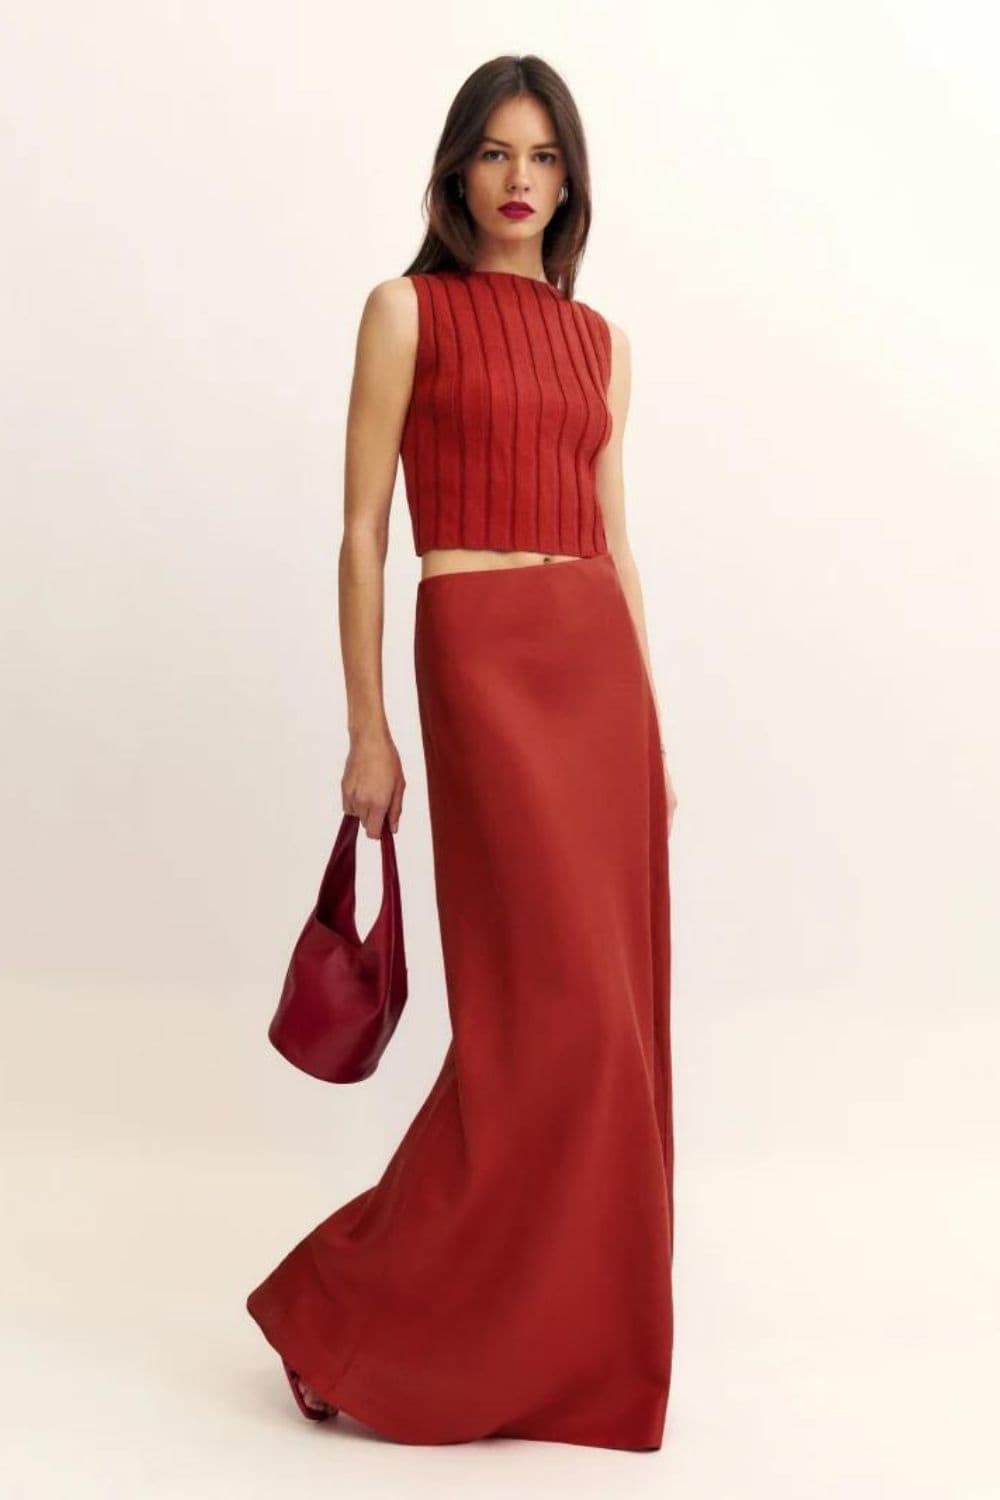 What to wear to opera with Long linen Skirt + High Neck Tank